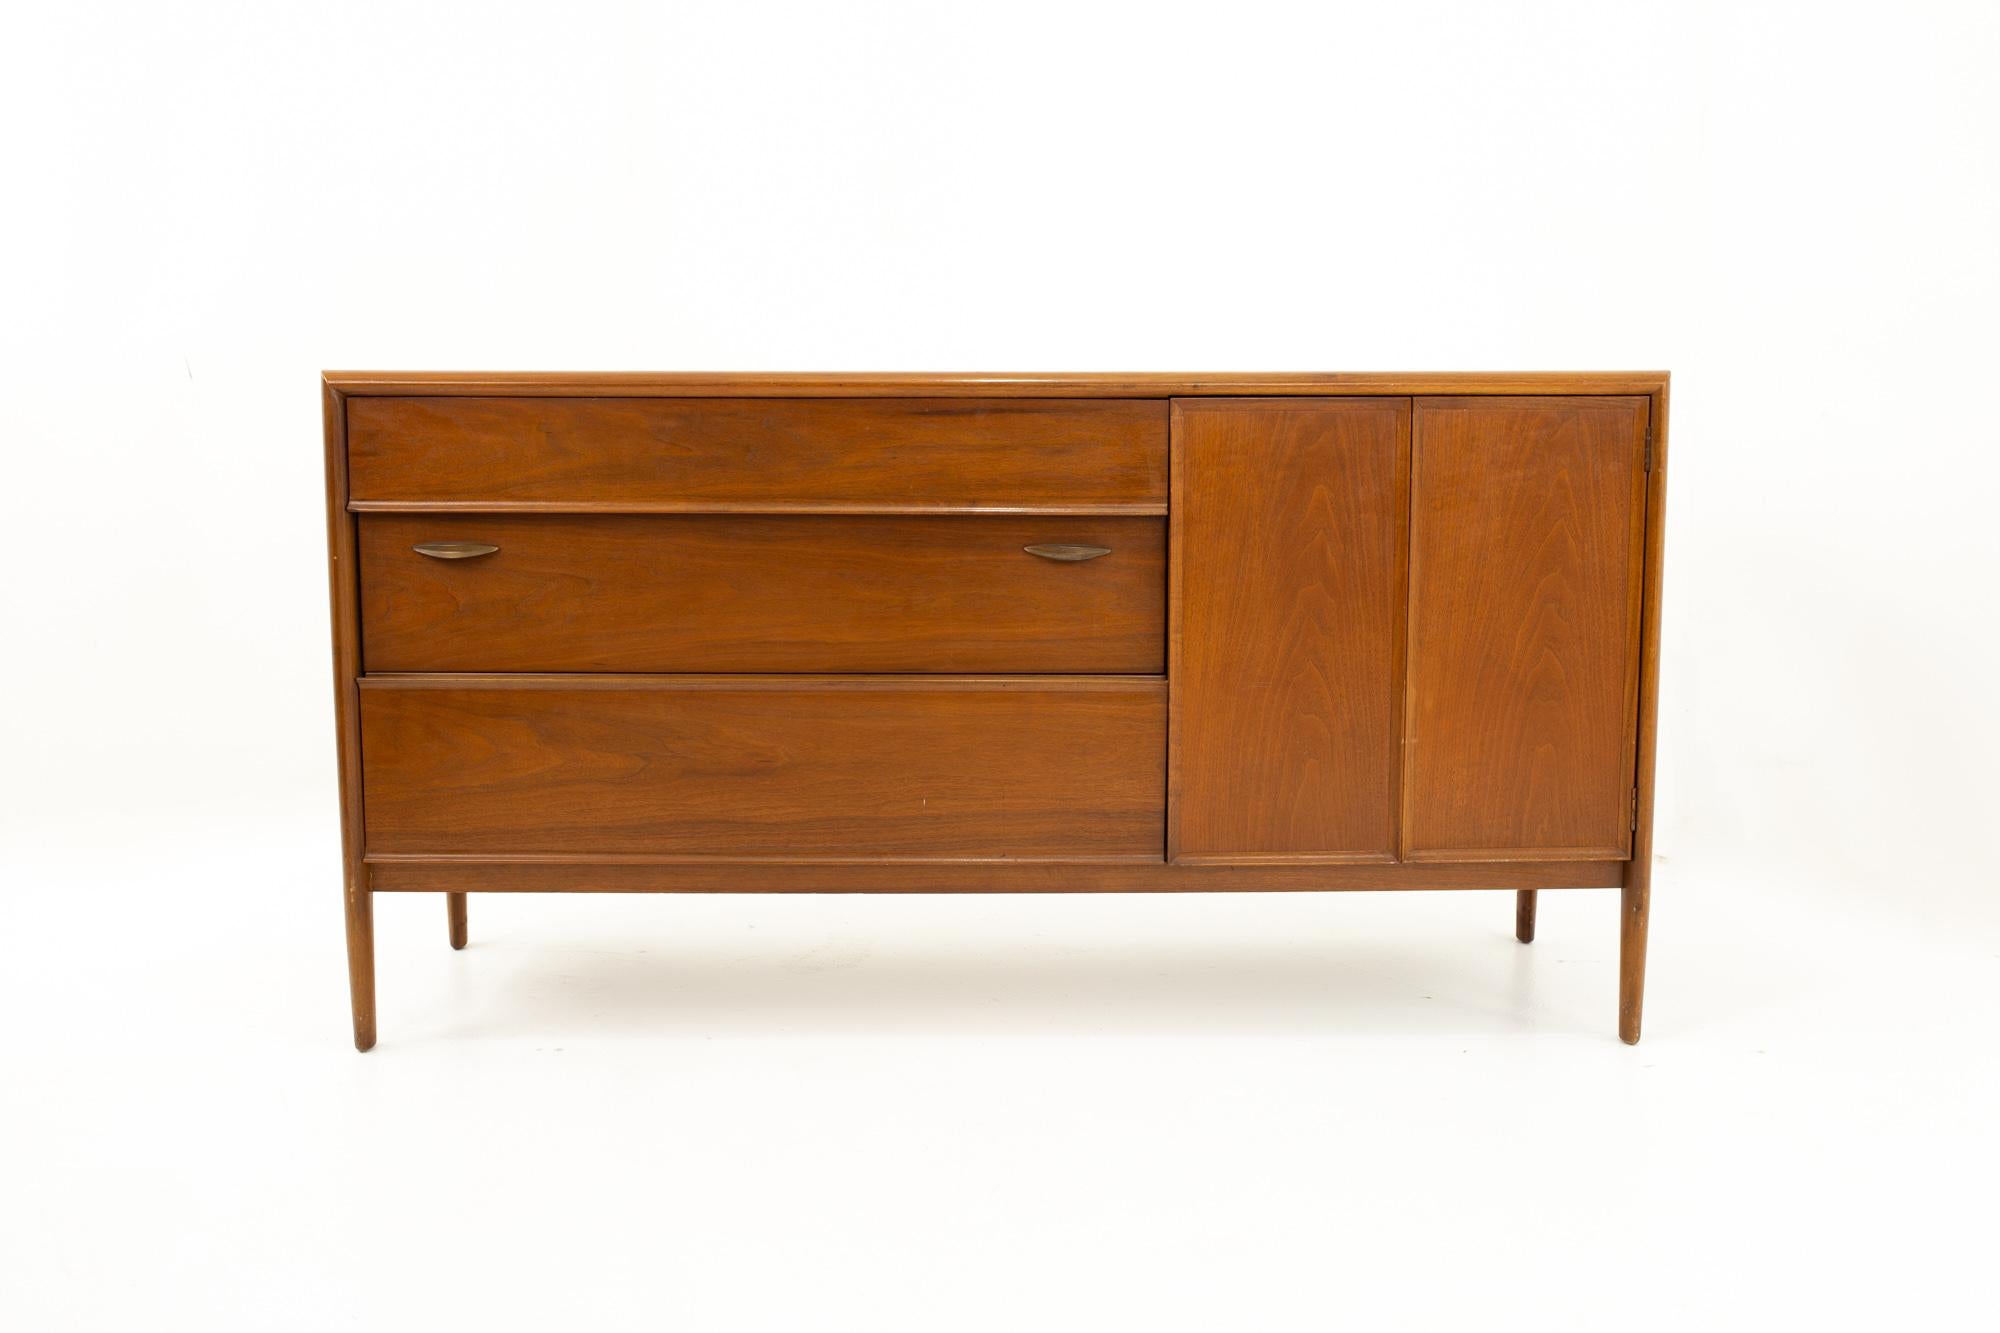 Barney Flagg for Drexel mid century parallel lowboy dresser

Dresser measures: 62 wide x 20 deep x 32 high

All pieces of furniture can be had in what we call restored vintage condition. That means the piece is restored upon purchase so it’s